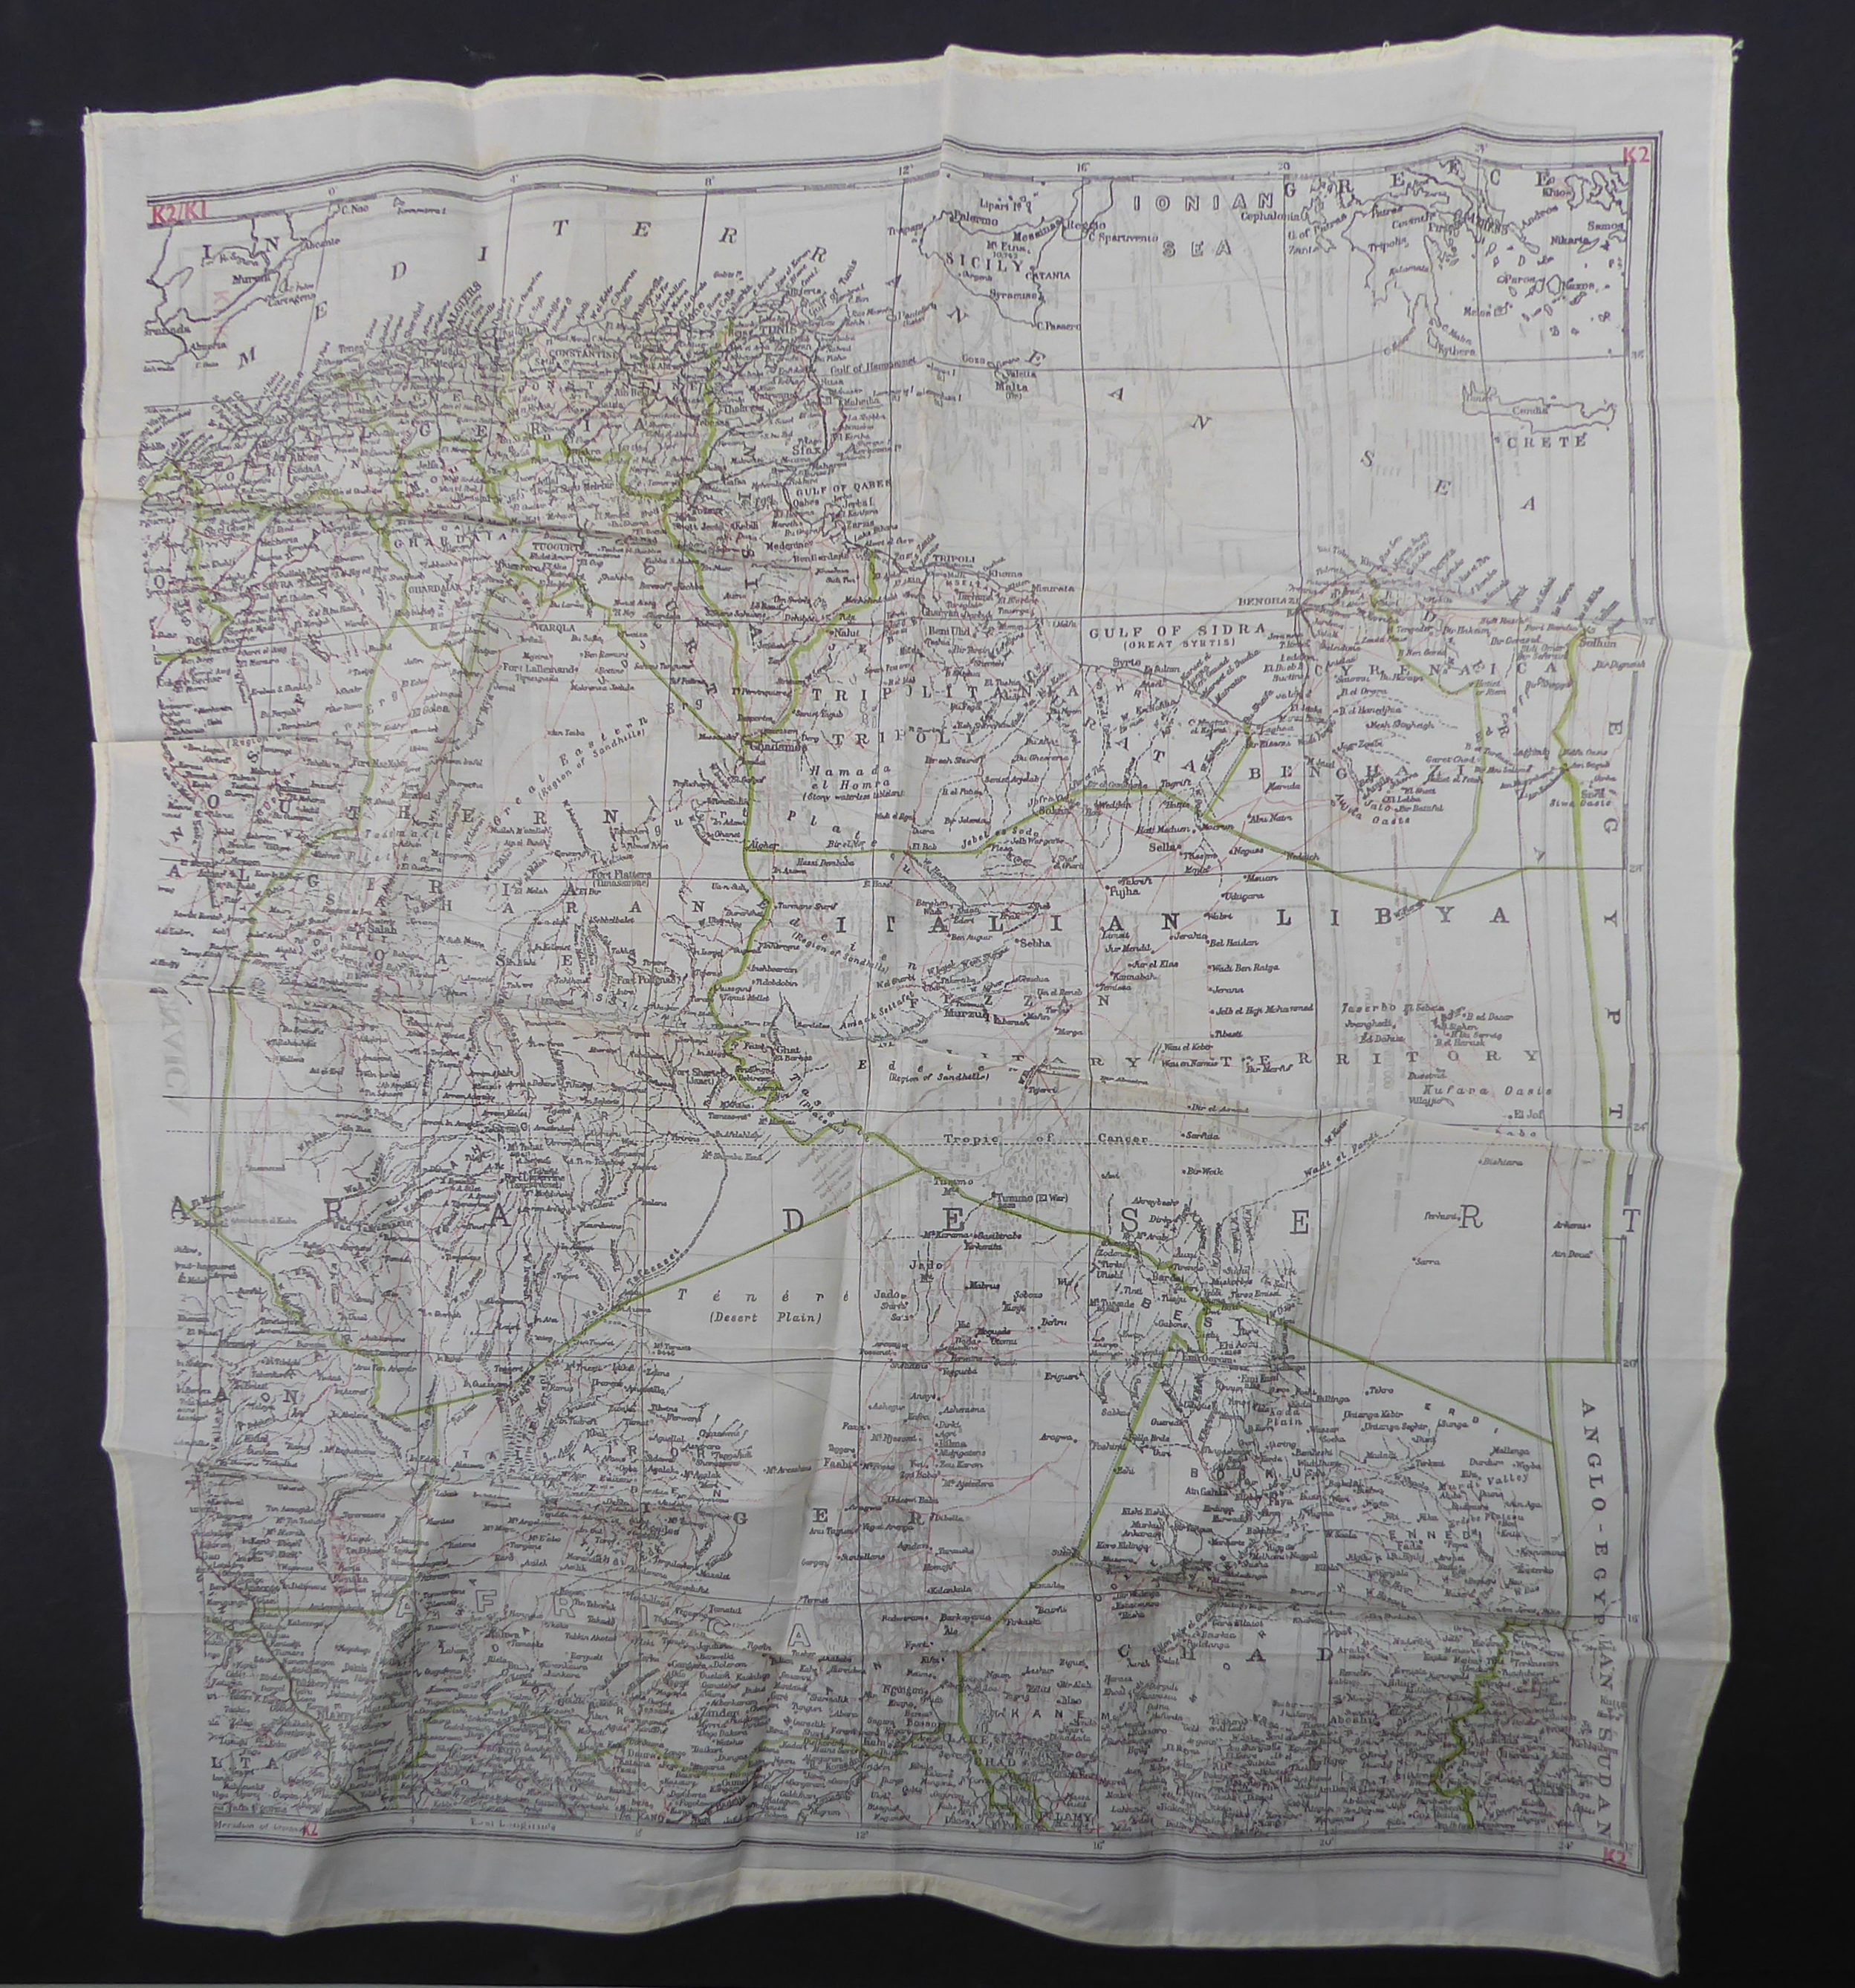 A WW2 Near East RAF / Special Forces silk escape map - printed double sided map K1/K2 Cyrenaica